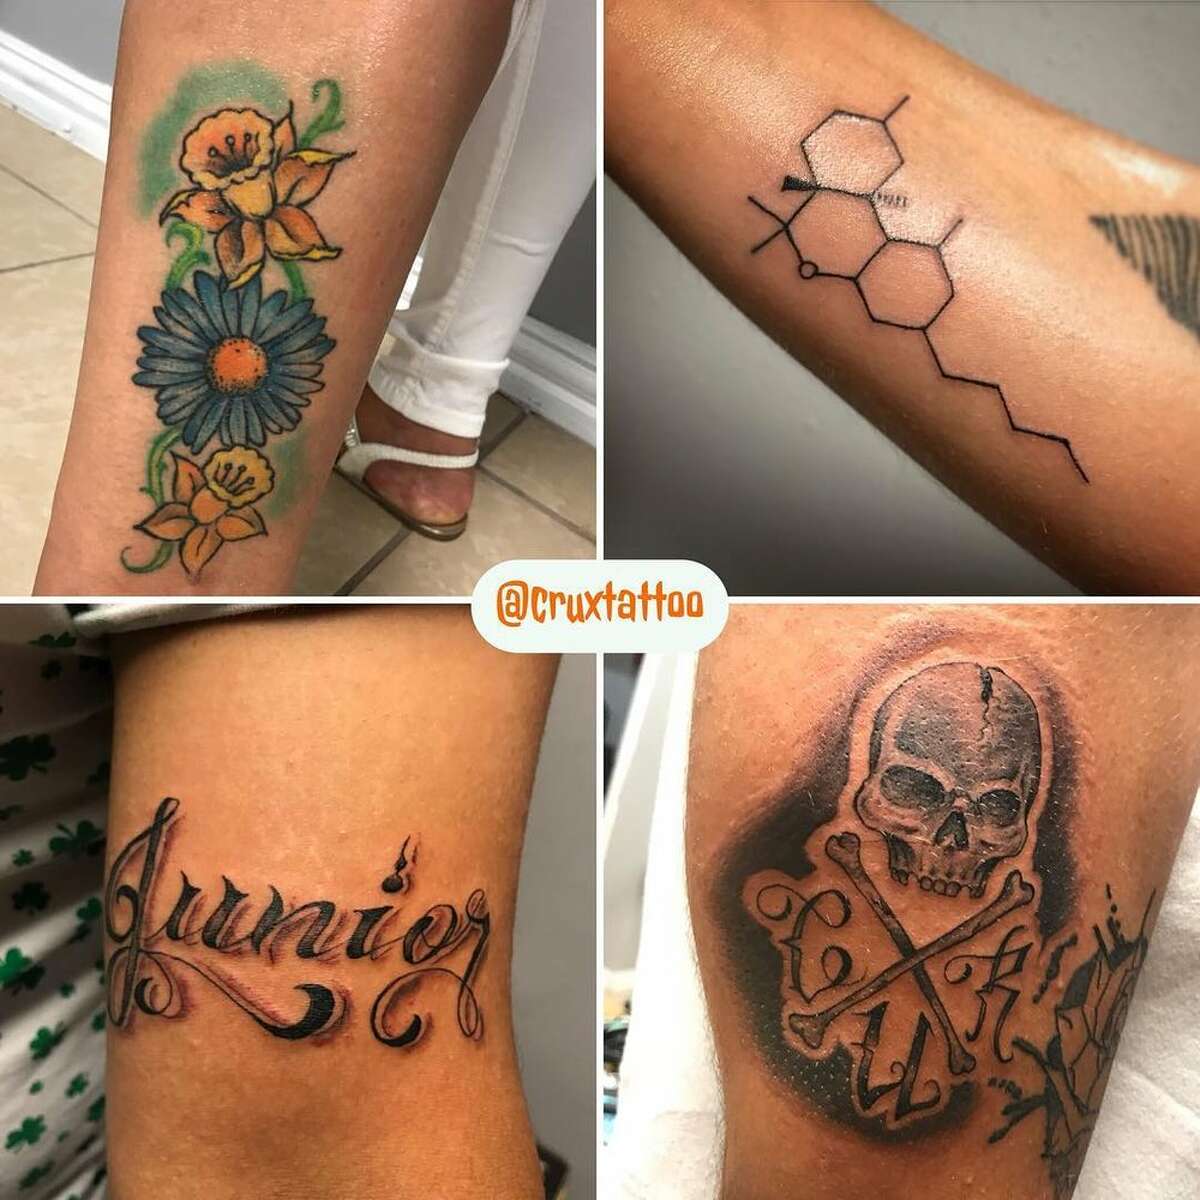 Yelp: Top-rated tattoo shops in Houston